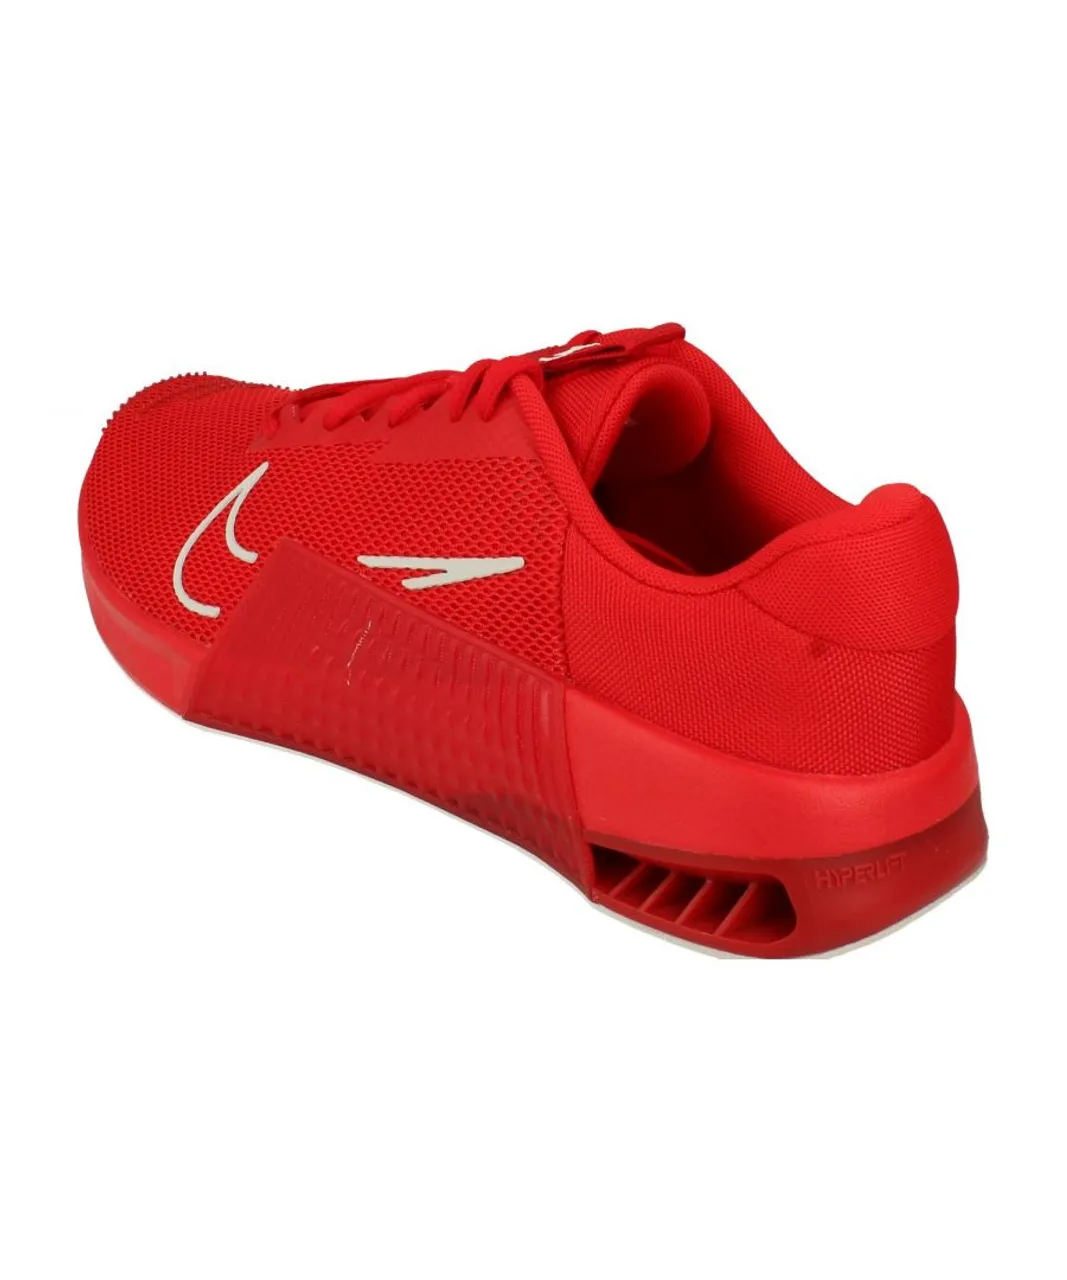 Nike Metcon 9 Mens Red Trainers